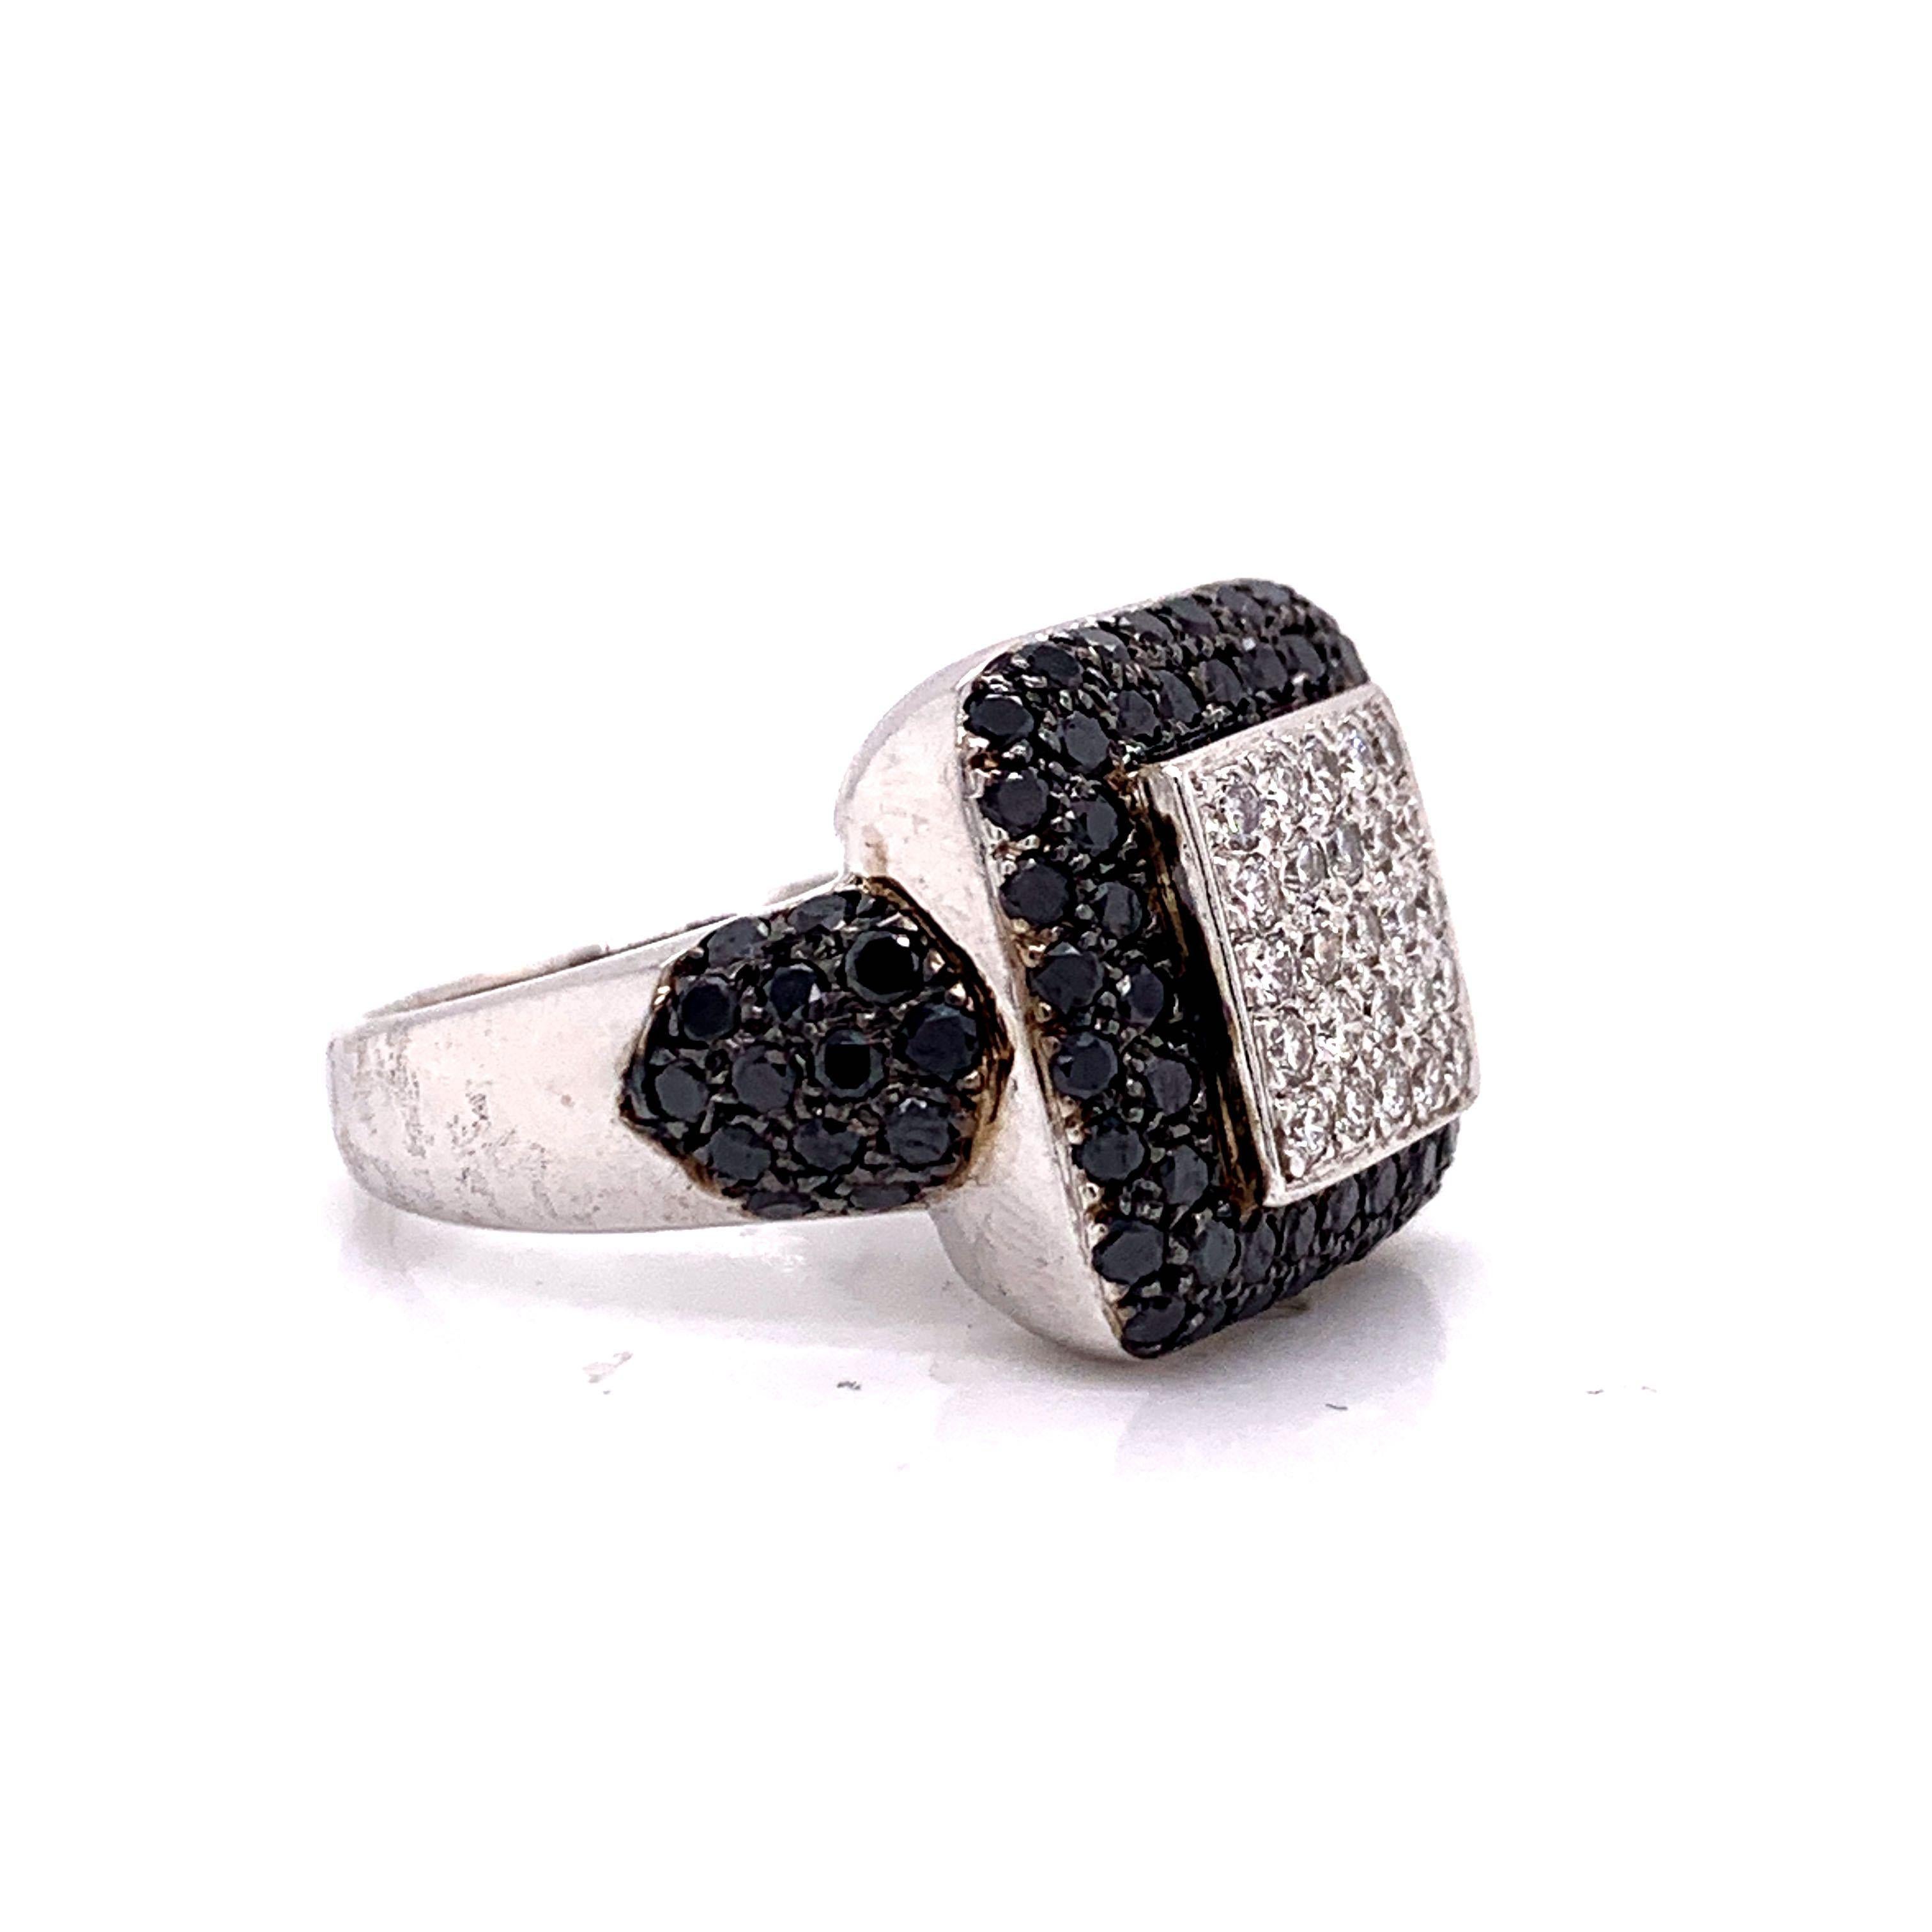 18k White Gold Vintage 2.1cttw Black and White Diamond Cluster Ring Size 7

Condition:  Good Condition
Metal:  18k Gold (Marked, and Professionally Tested)
Weight:  12.5g
Diamonds:  Round Cut White and Black Diamonds 2.1cttw
Mounting:  Cushion